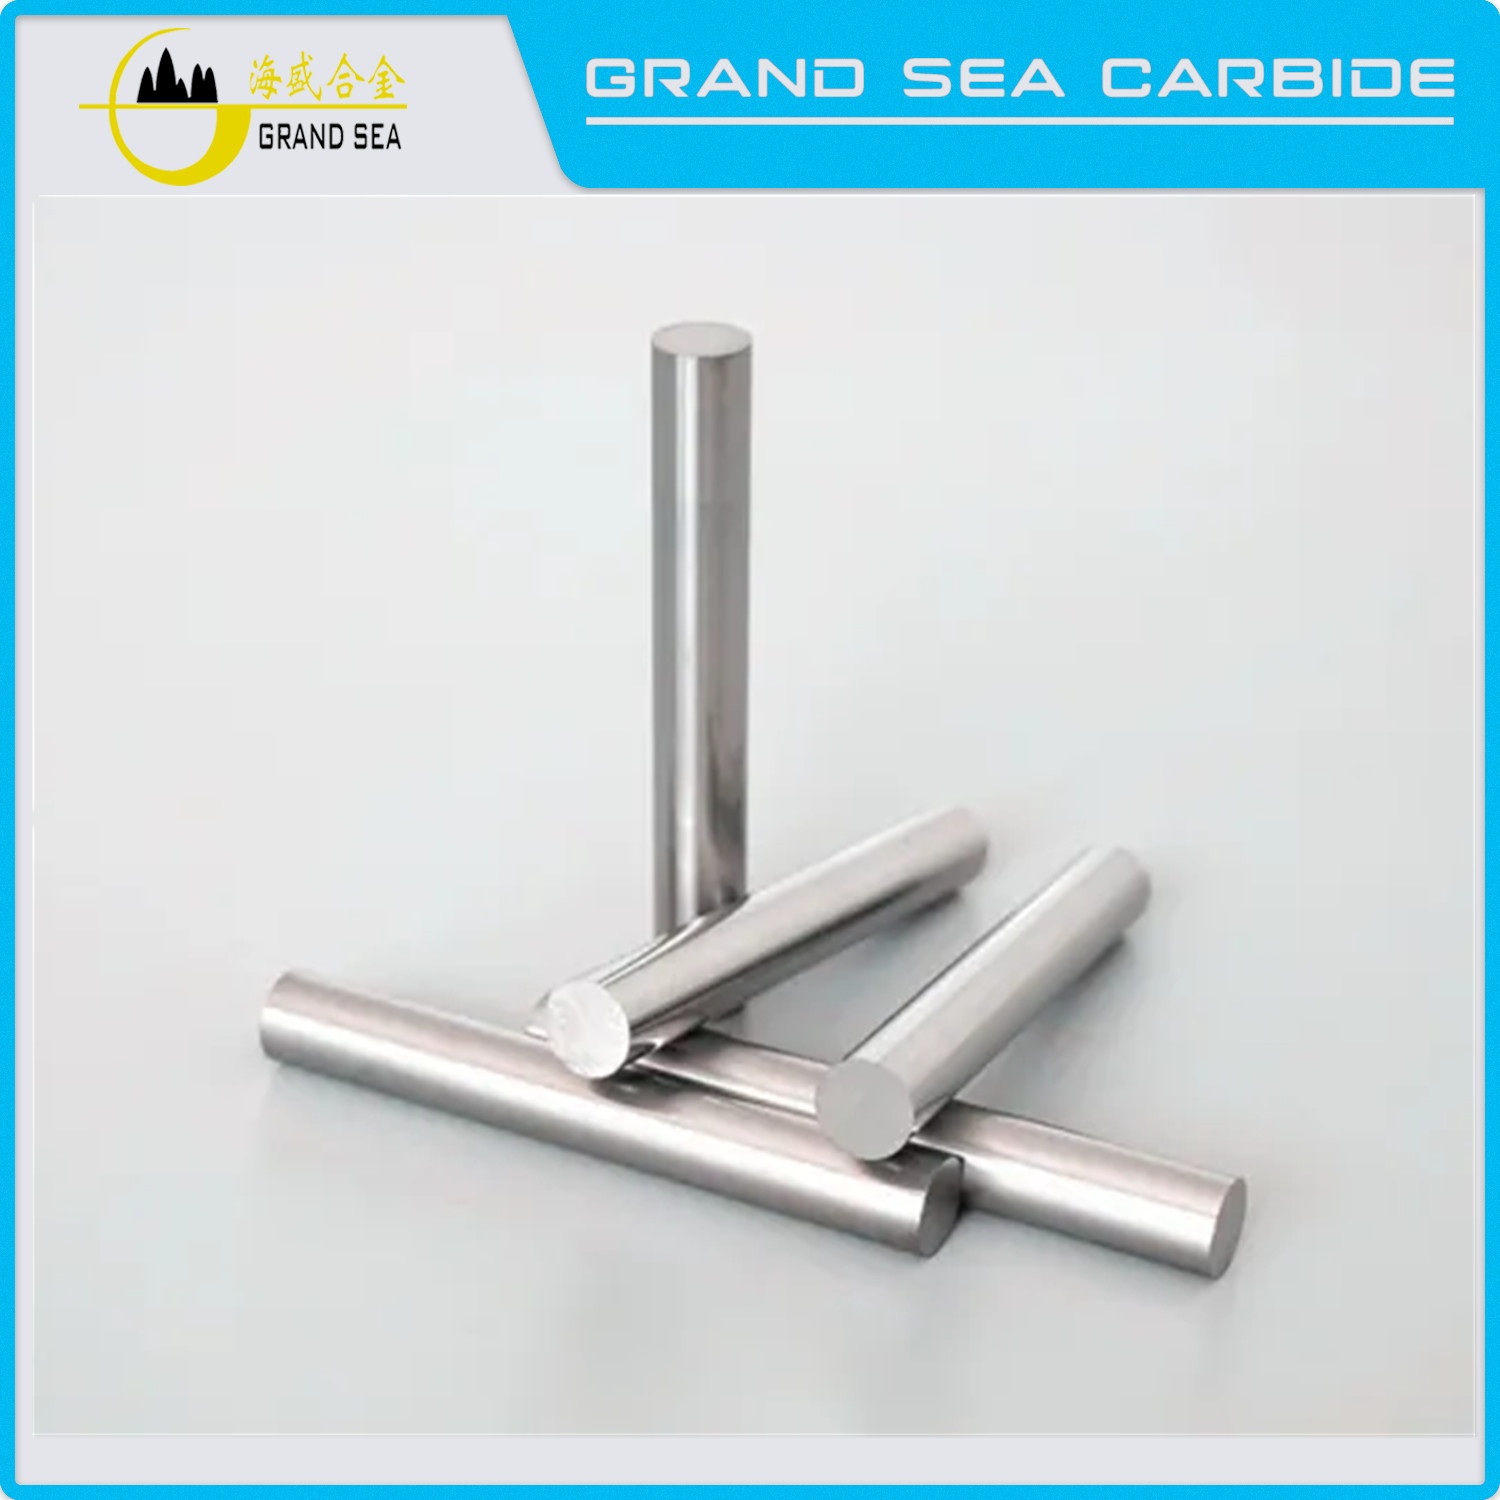 High Quality Polished Tungsten Carbide Rod